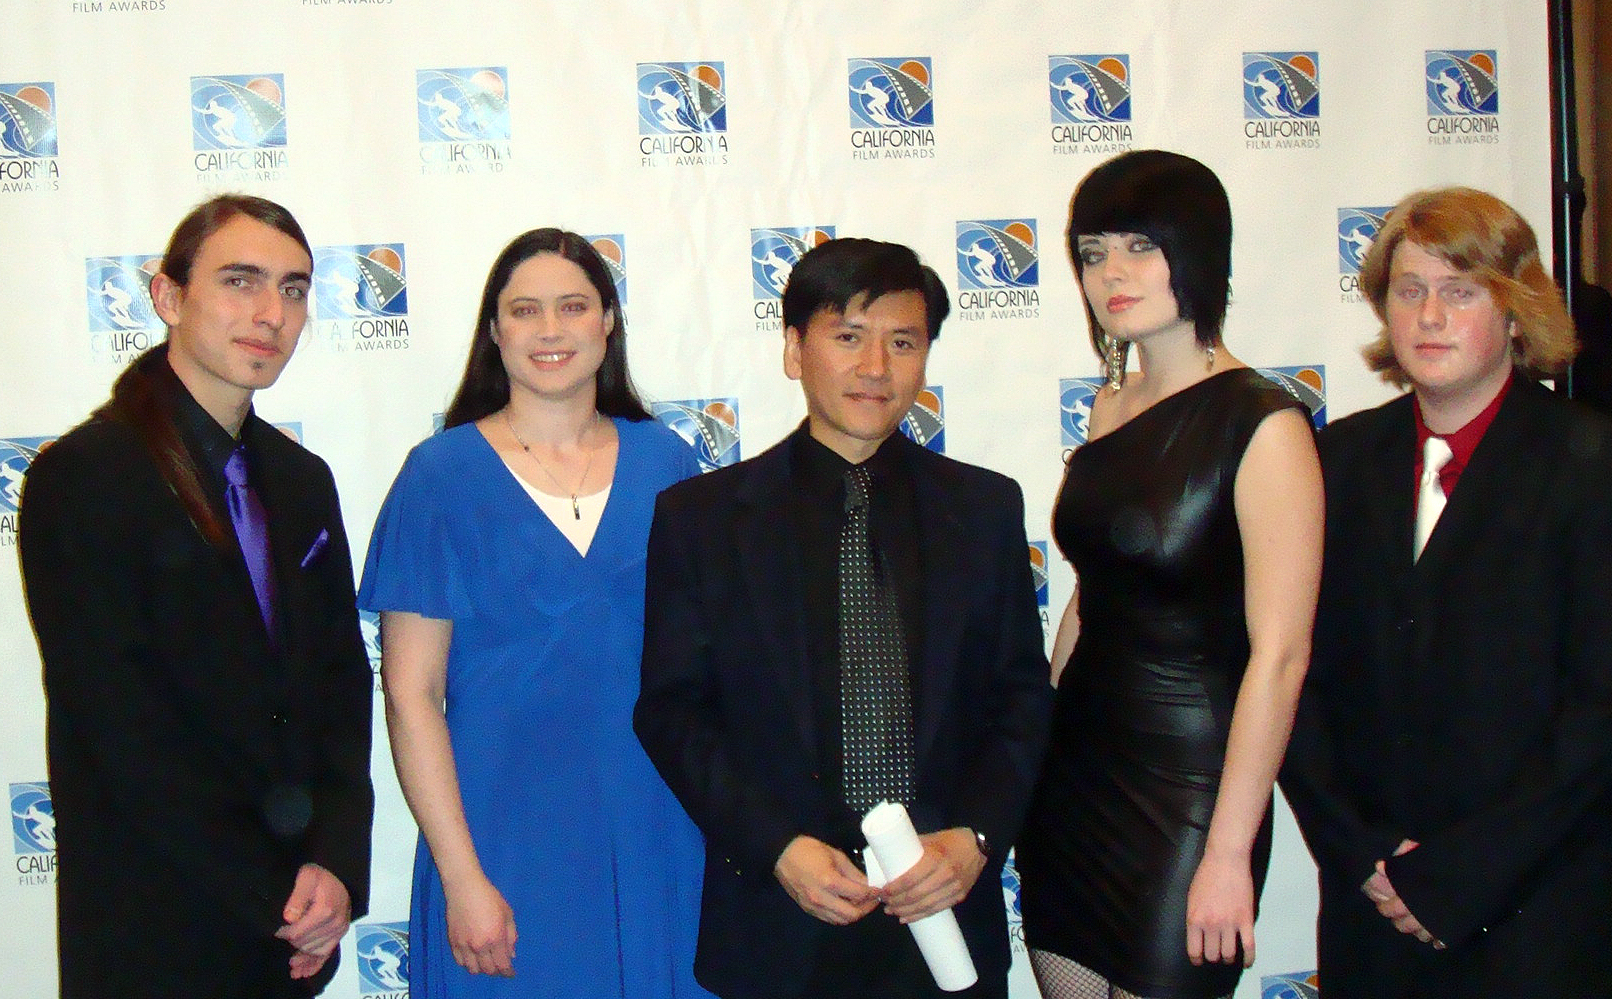 Cal Nguyen at the 2011 California Film Awards in San Diego, CA, pre-ceremony photo for his Diamond Award win in Television Productions for 